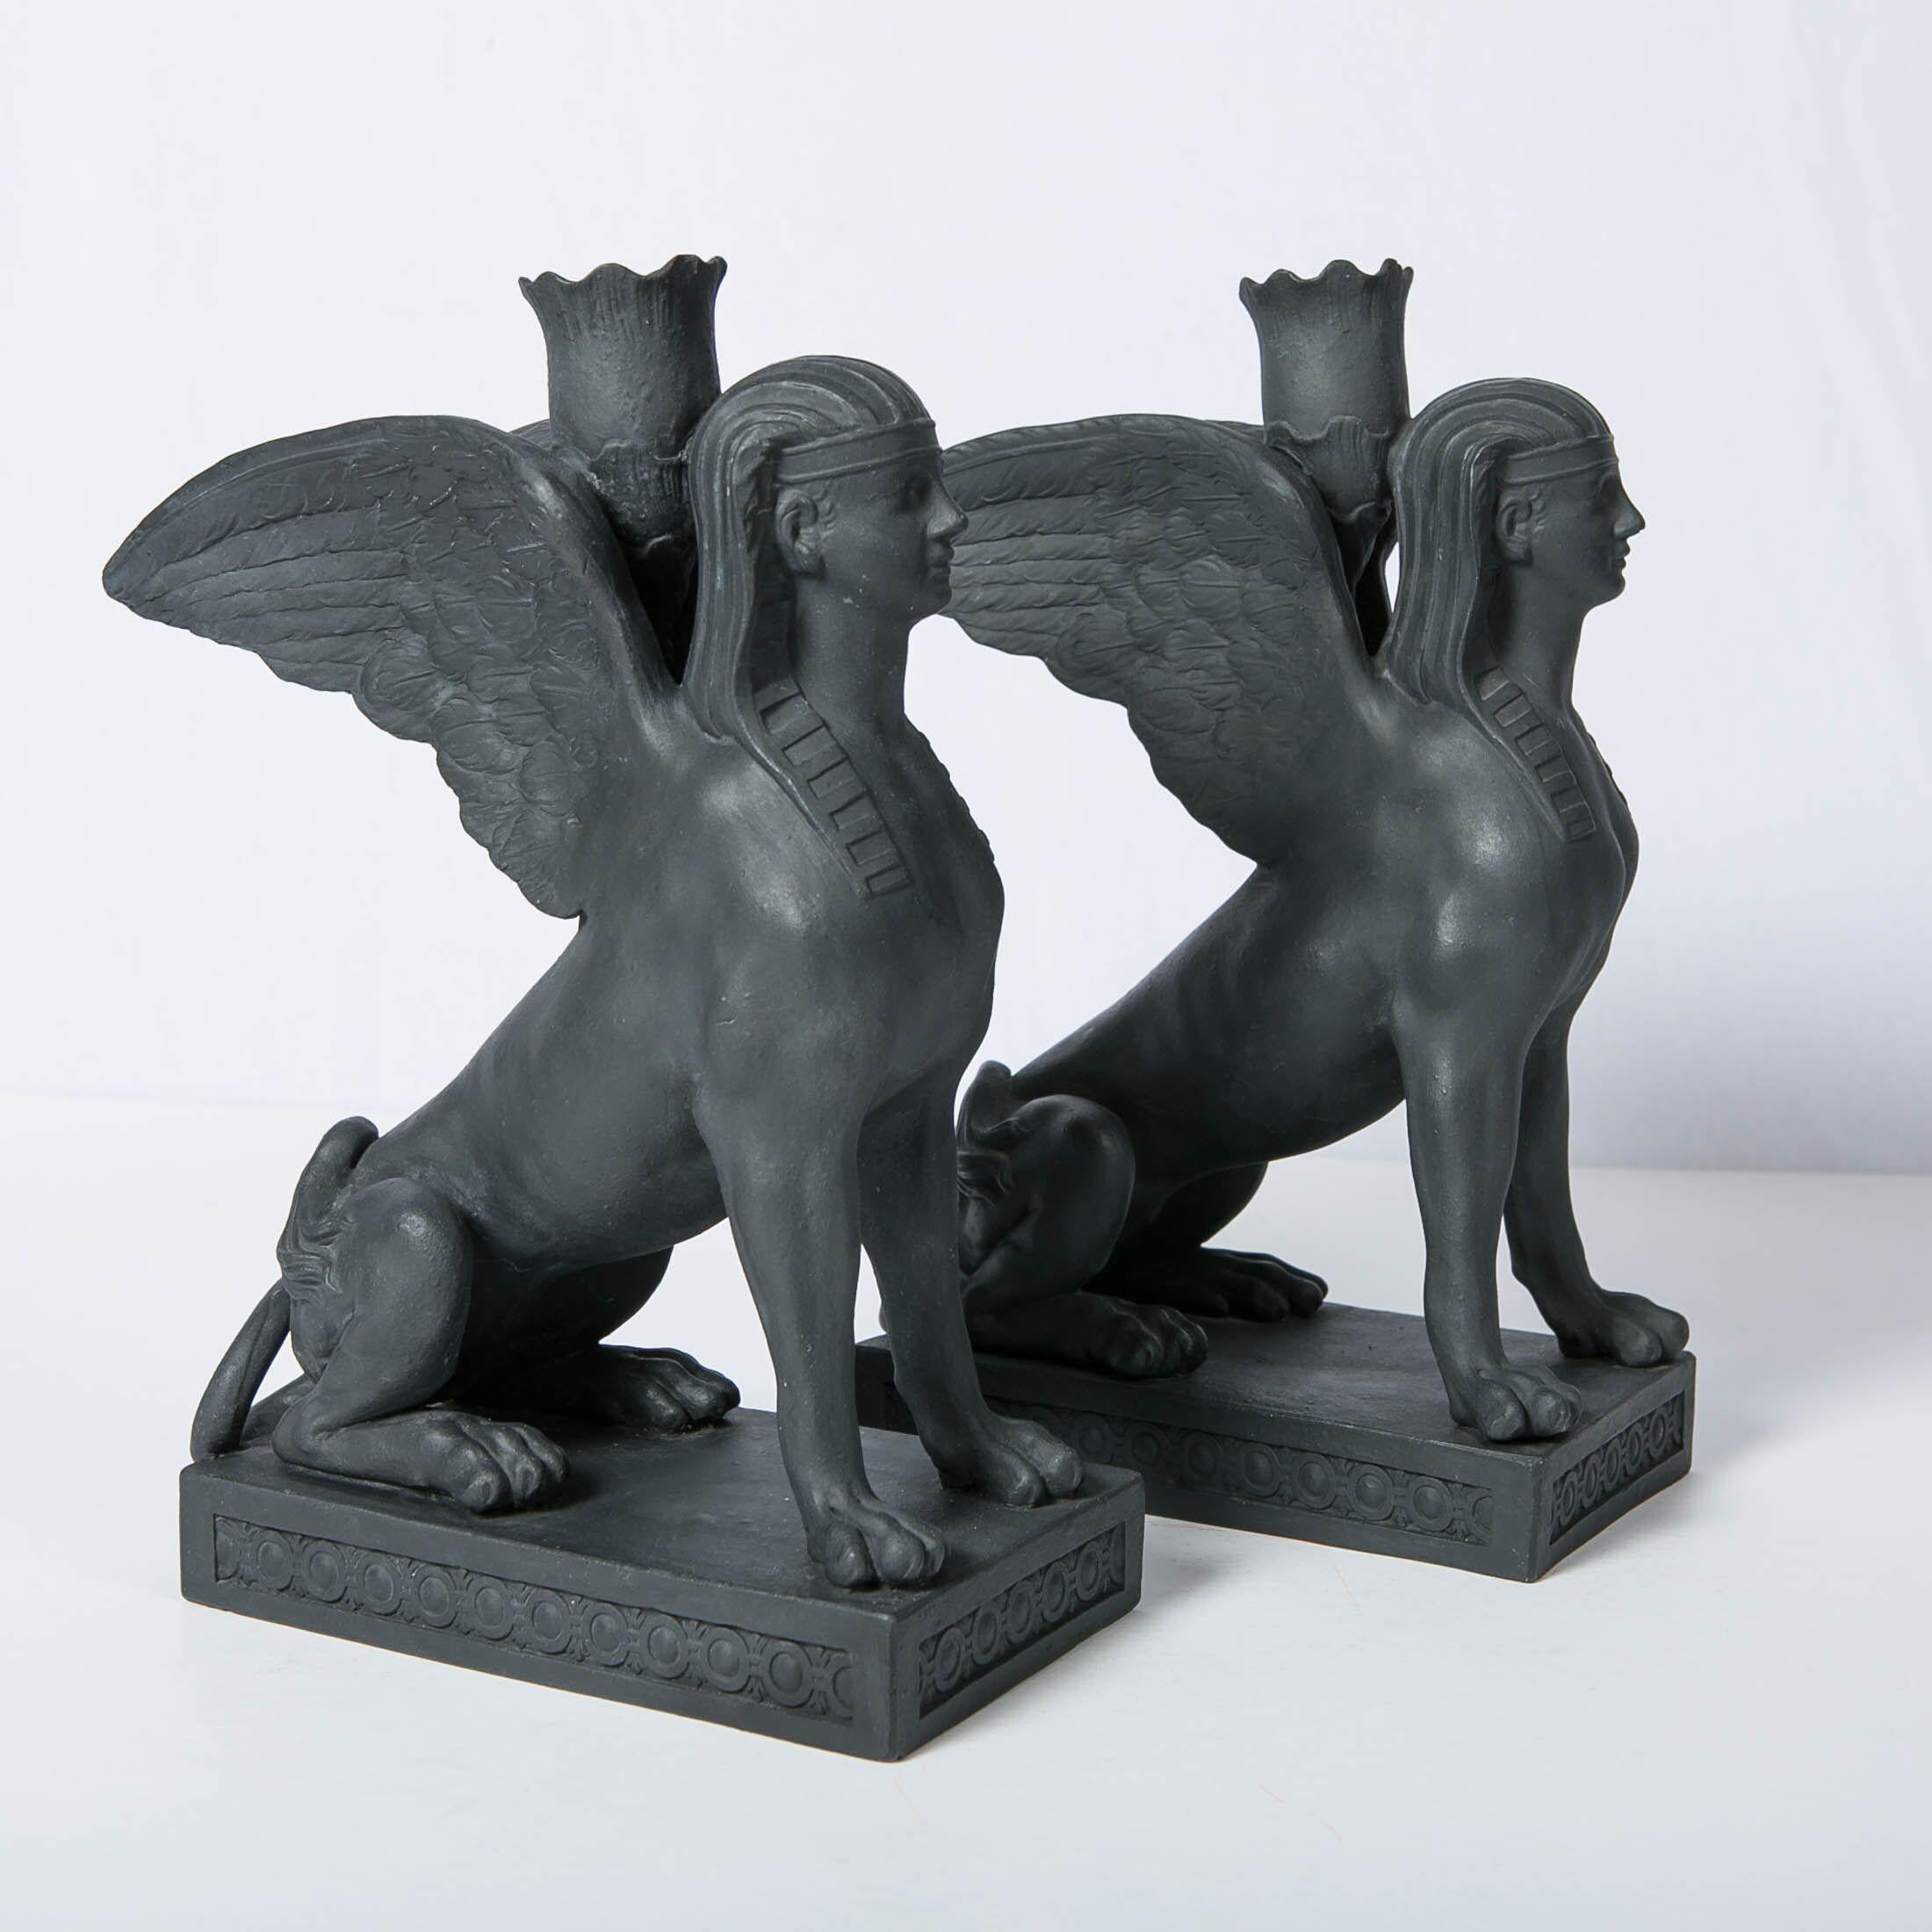 Pair Wedgwood Egyptian Revival Black Basalt Sphinxes Made 18th Century, England In Excellent Condition For Sale In Katonah, NY